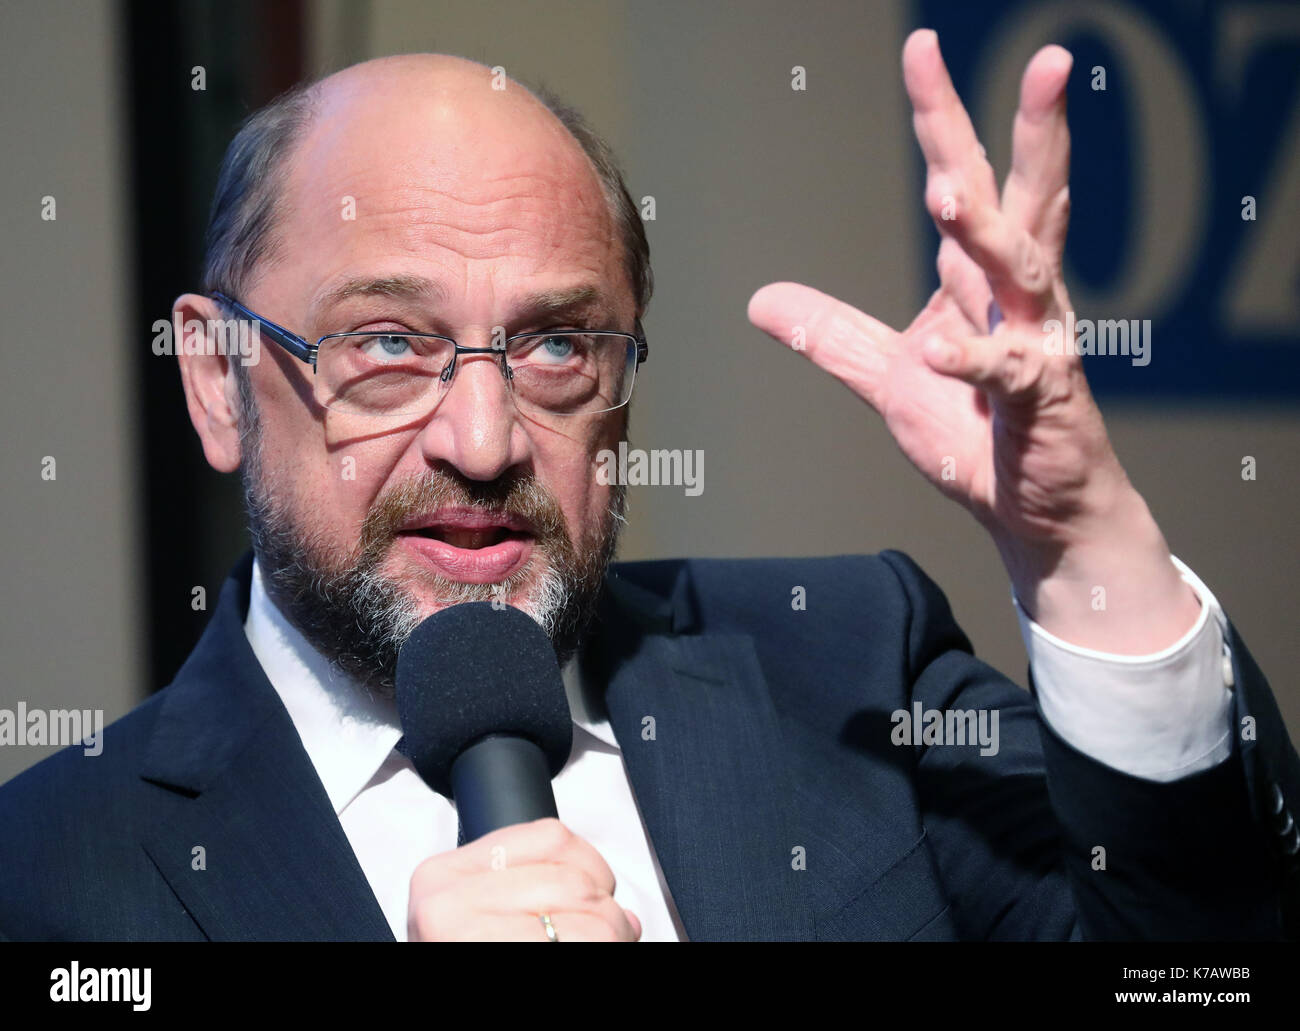 Rostock, Germany. 15th Sep, 2017. Martin Schulz, candidate for chancellorship from the Social Democratic Party of Germany (SPD), speaking at an event of the 'Ostsee-Zeitung' (lit. Baltic Sea newspaper) in Rostock, Germany, 15 September 2017. He has been on a campaign trail with minister president Manuela Schwesig. Photo: Bernd Wüstneck/dpa/Alamy Live News Stock Photo